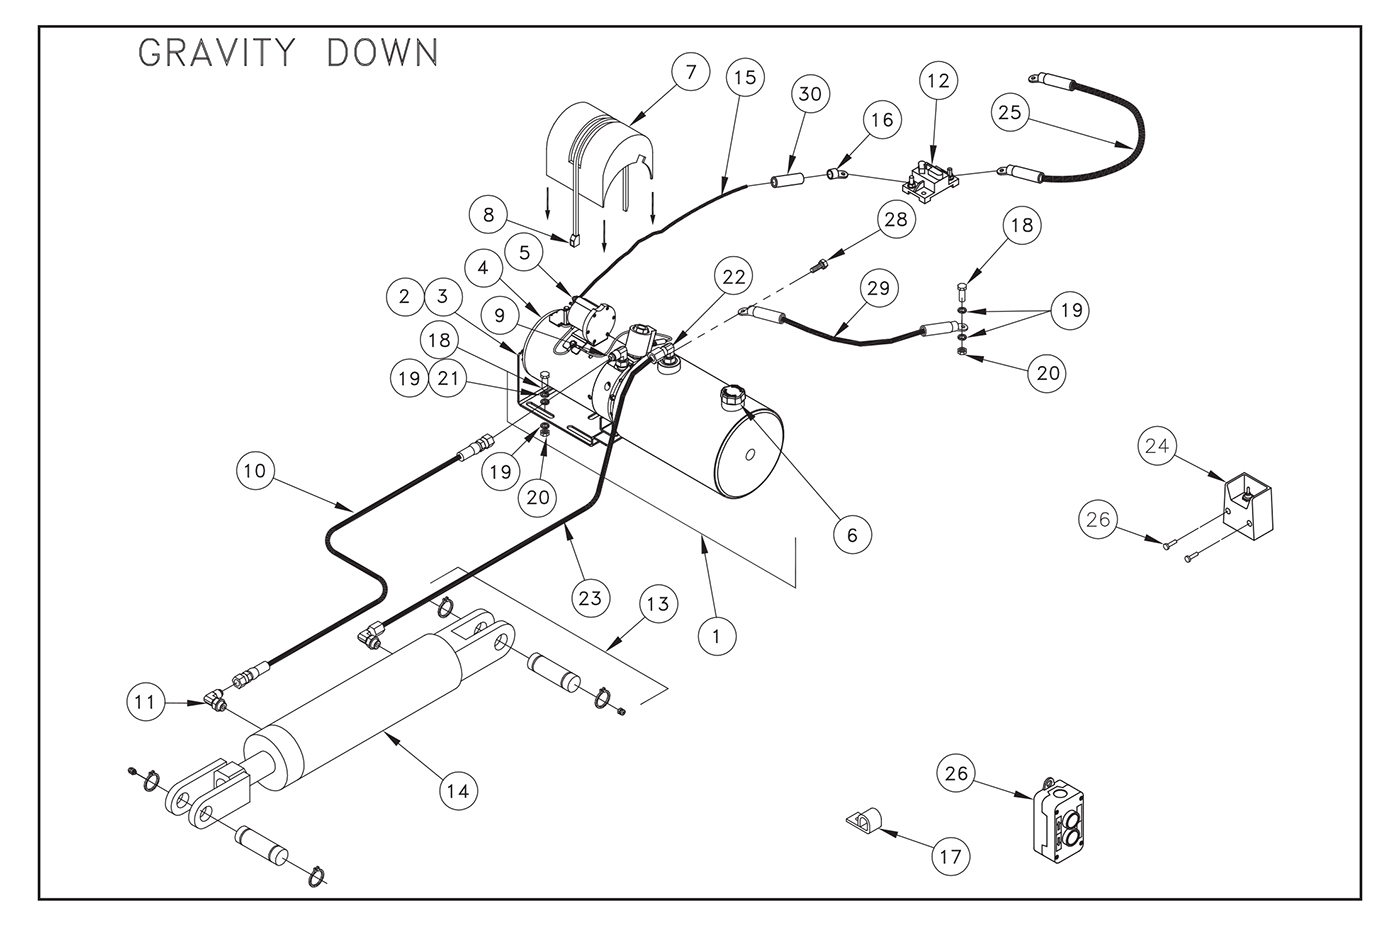 ST22 Electric Control/Gravity Down Pump Assembly Diagram